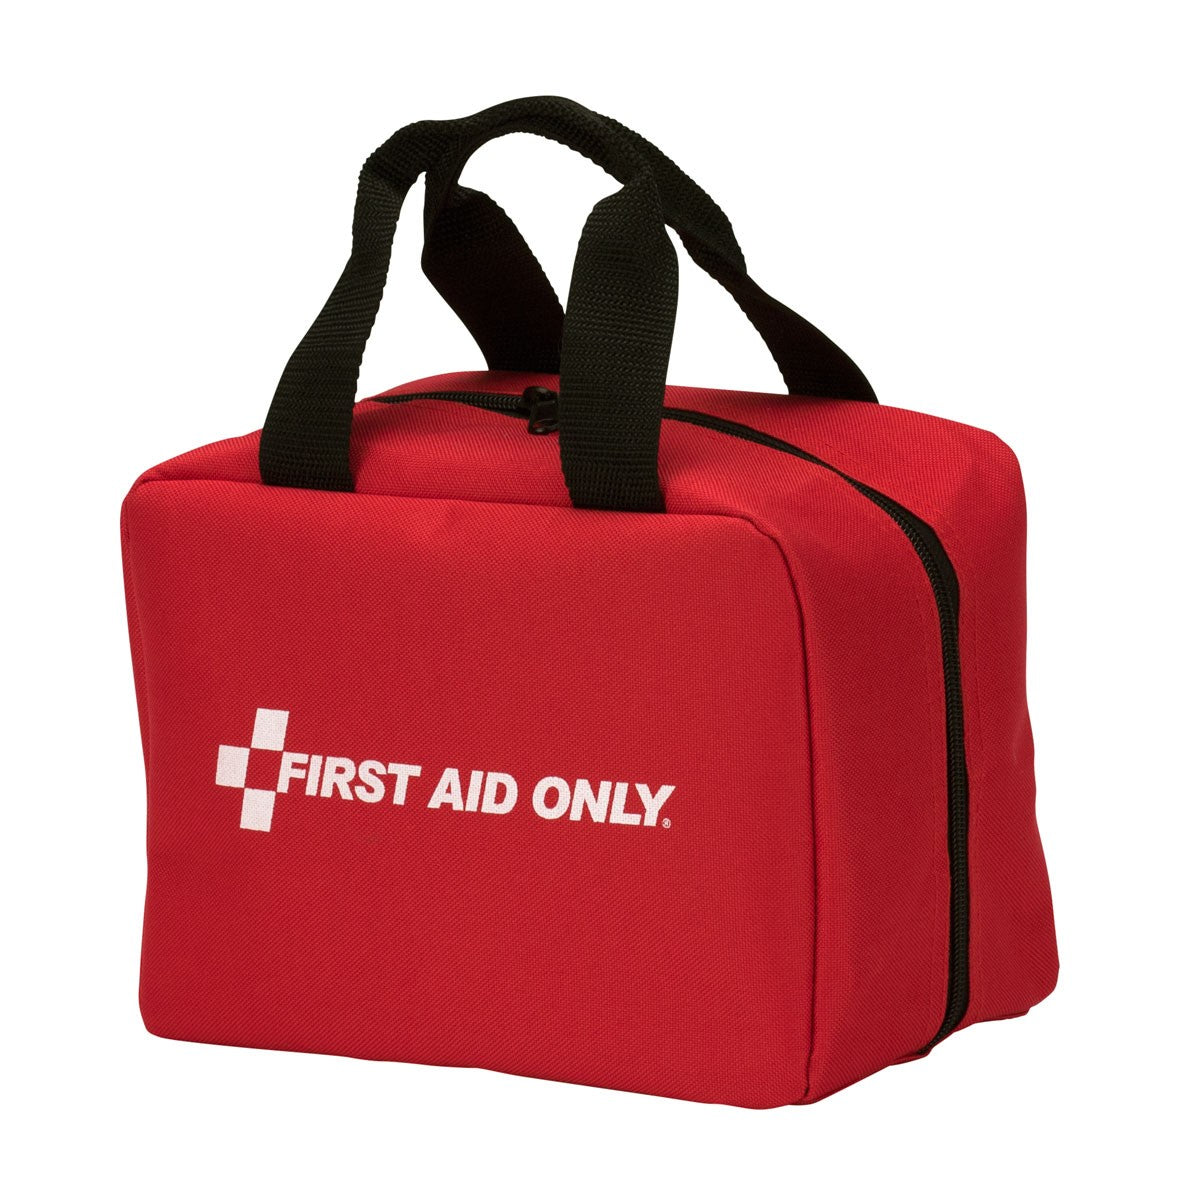 50 Person First Aid Kit, ANSI A+, Fabric Case - BS-FAK-90599-1-FM